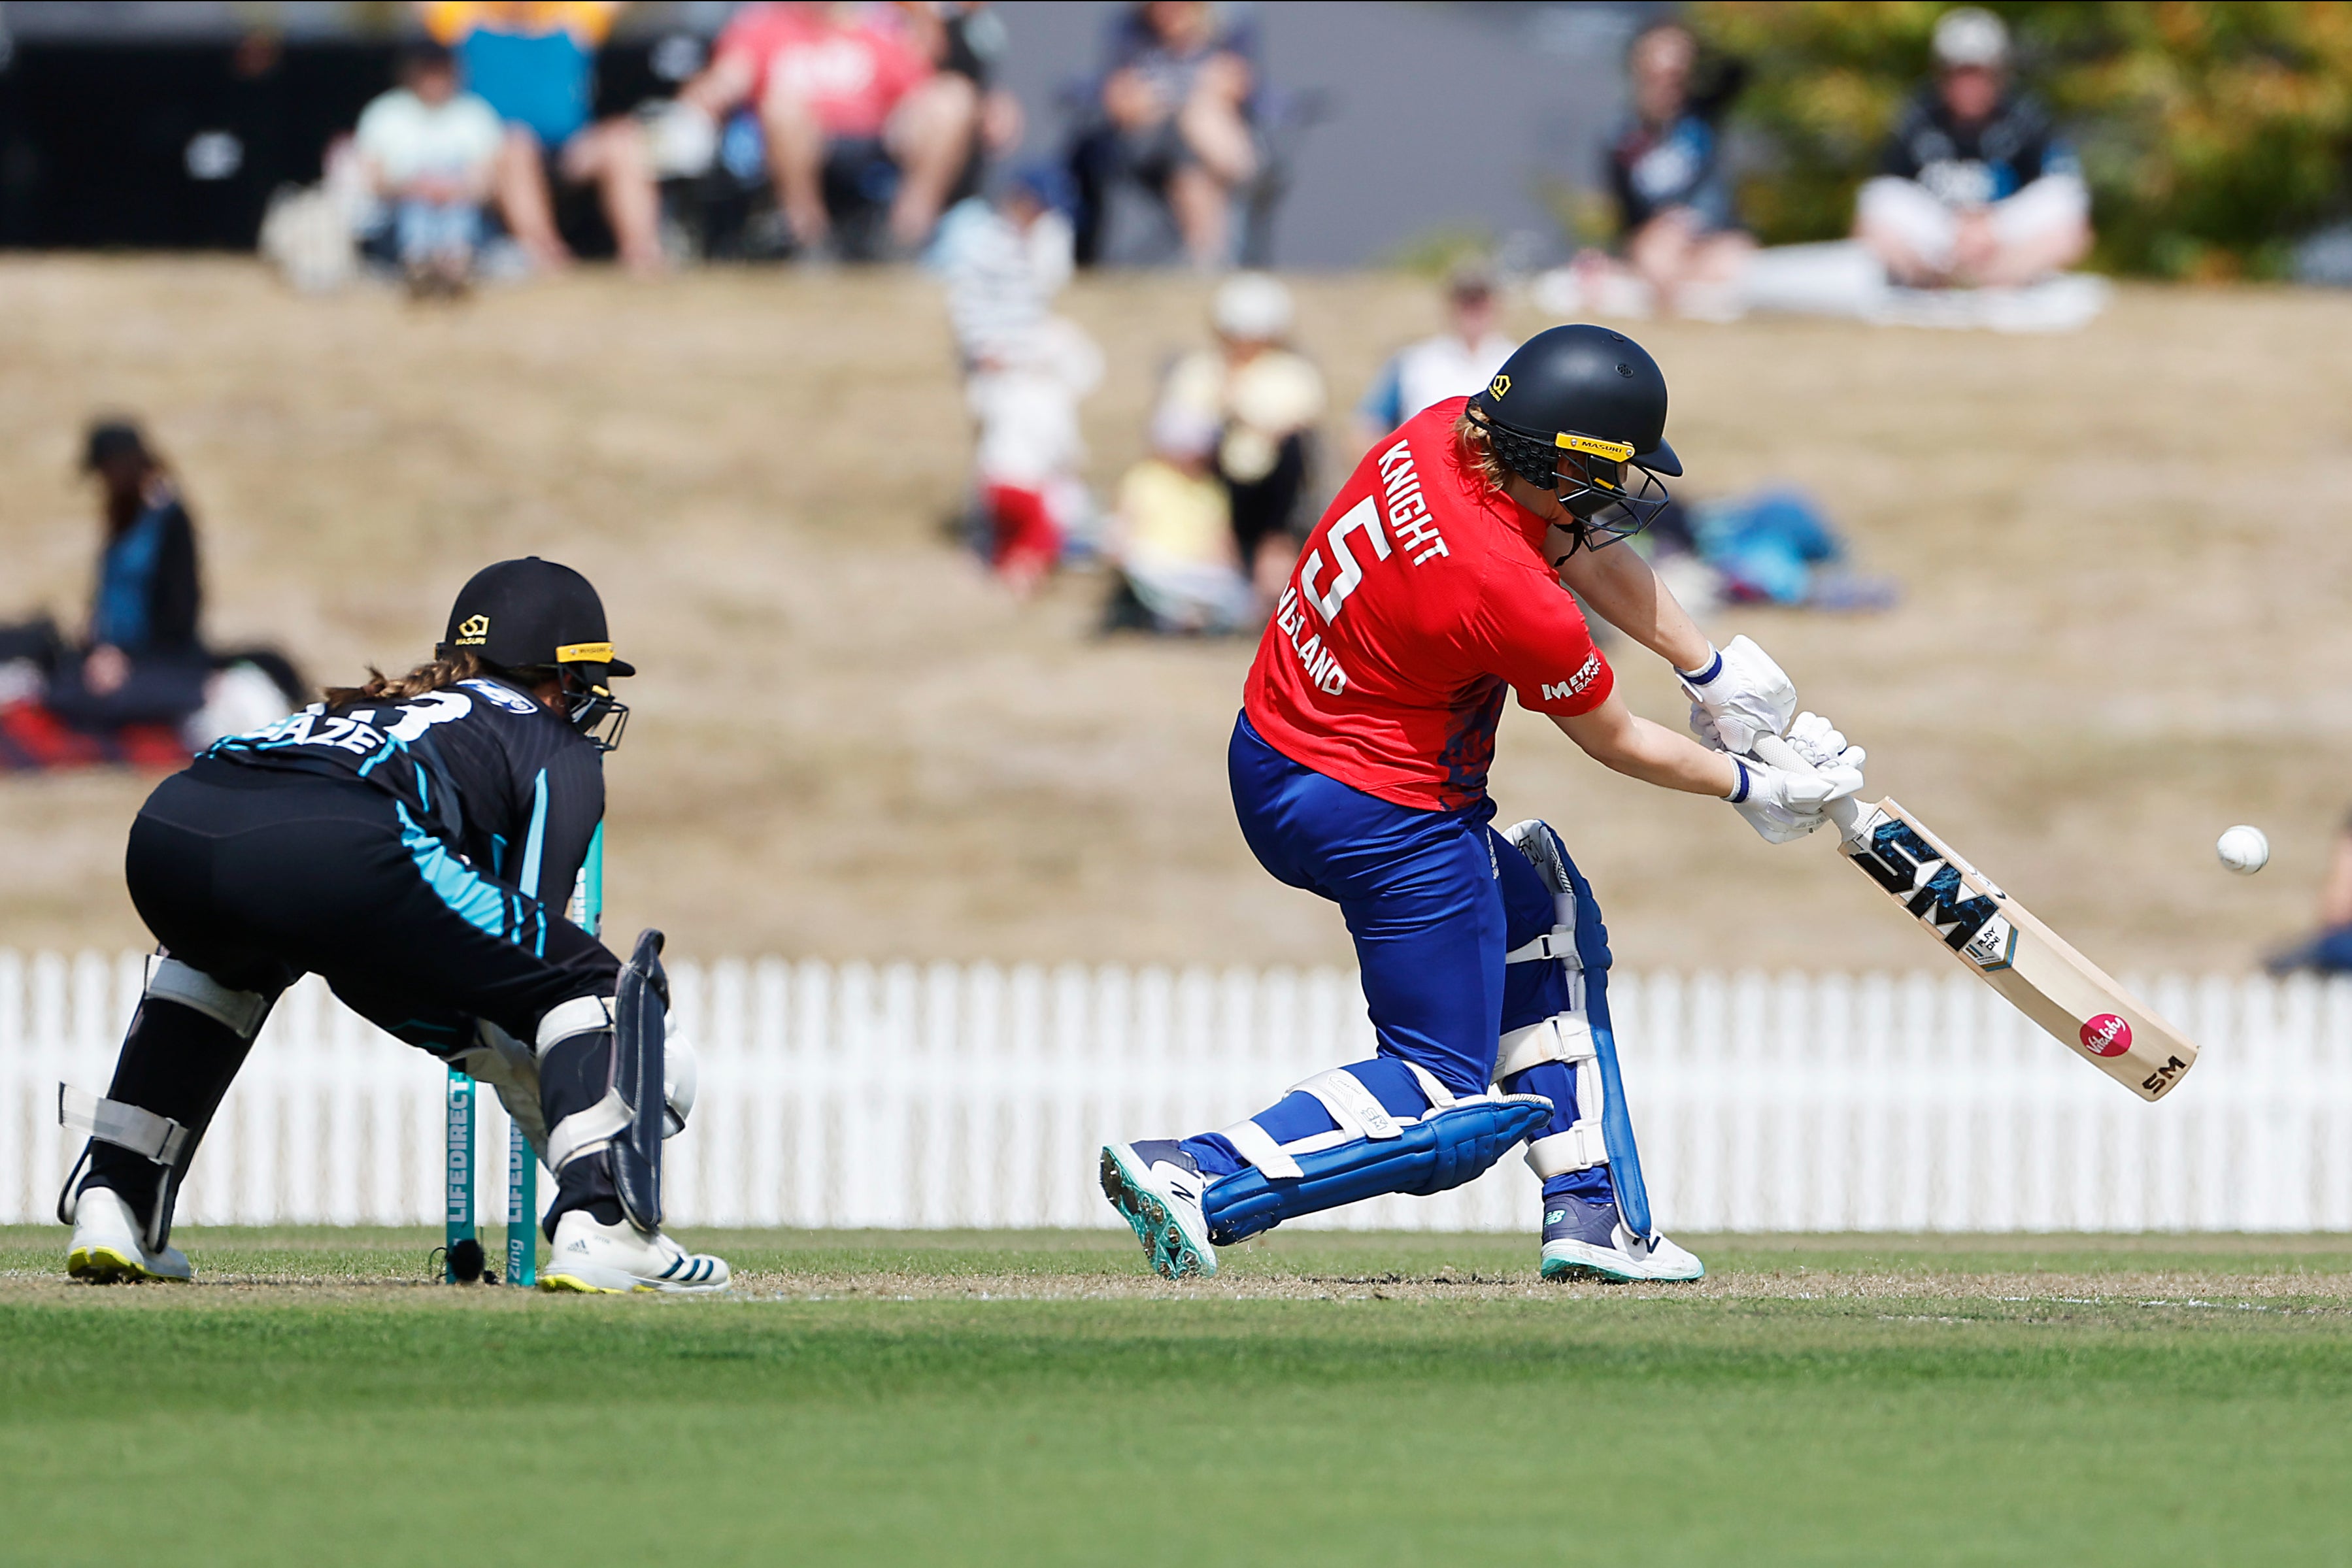 Heather Knight scored her second 50 of the series as England continued a strong start to their tour of New Zealand